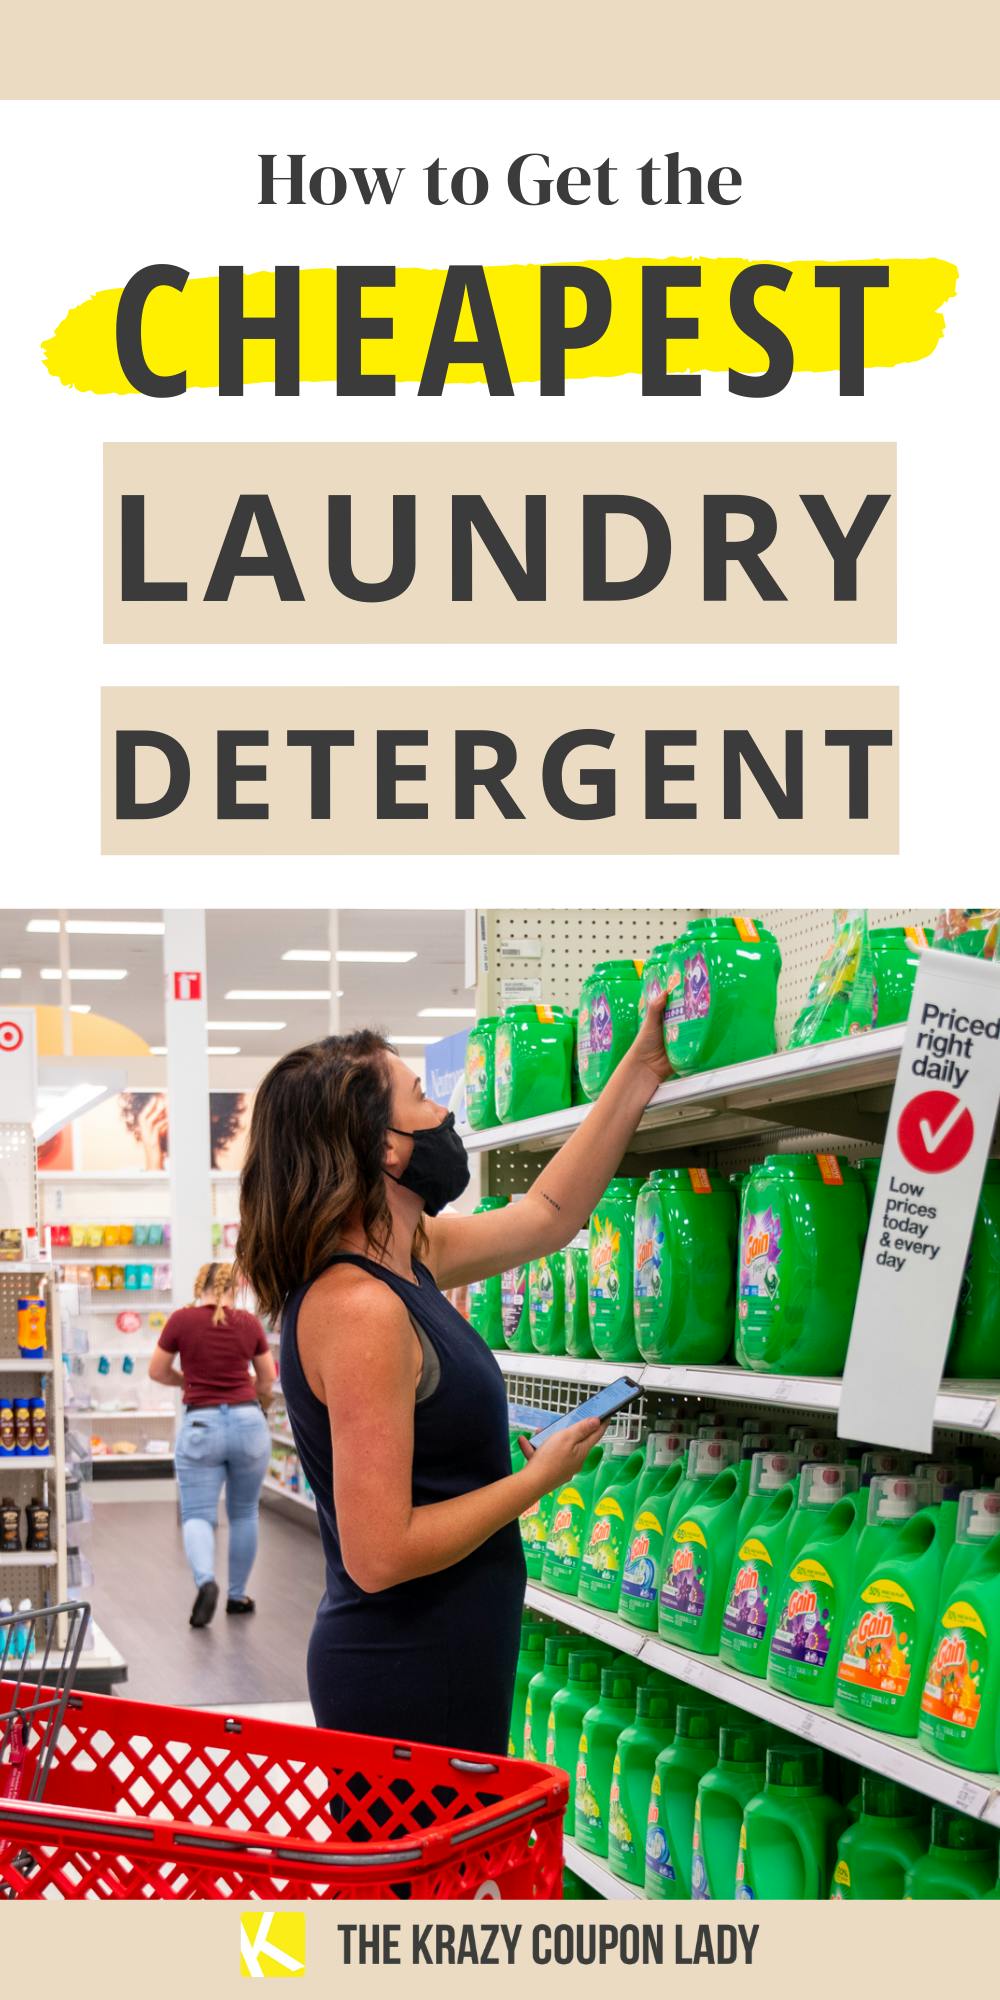 How to Get the Cheapest Laundry Detergent With Coupons or Not